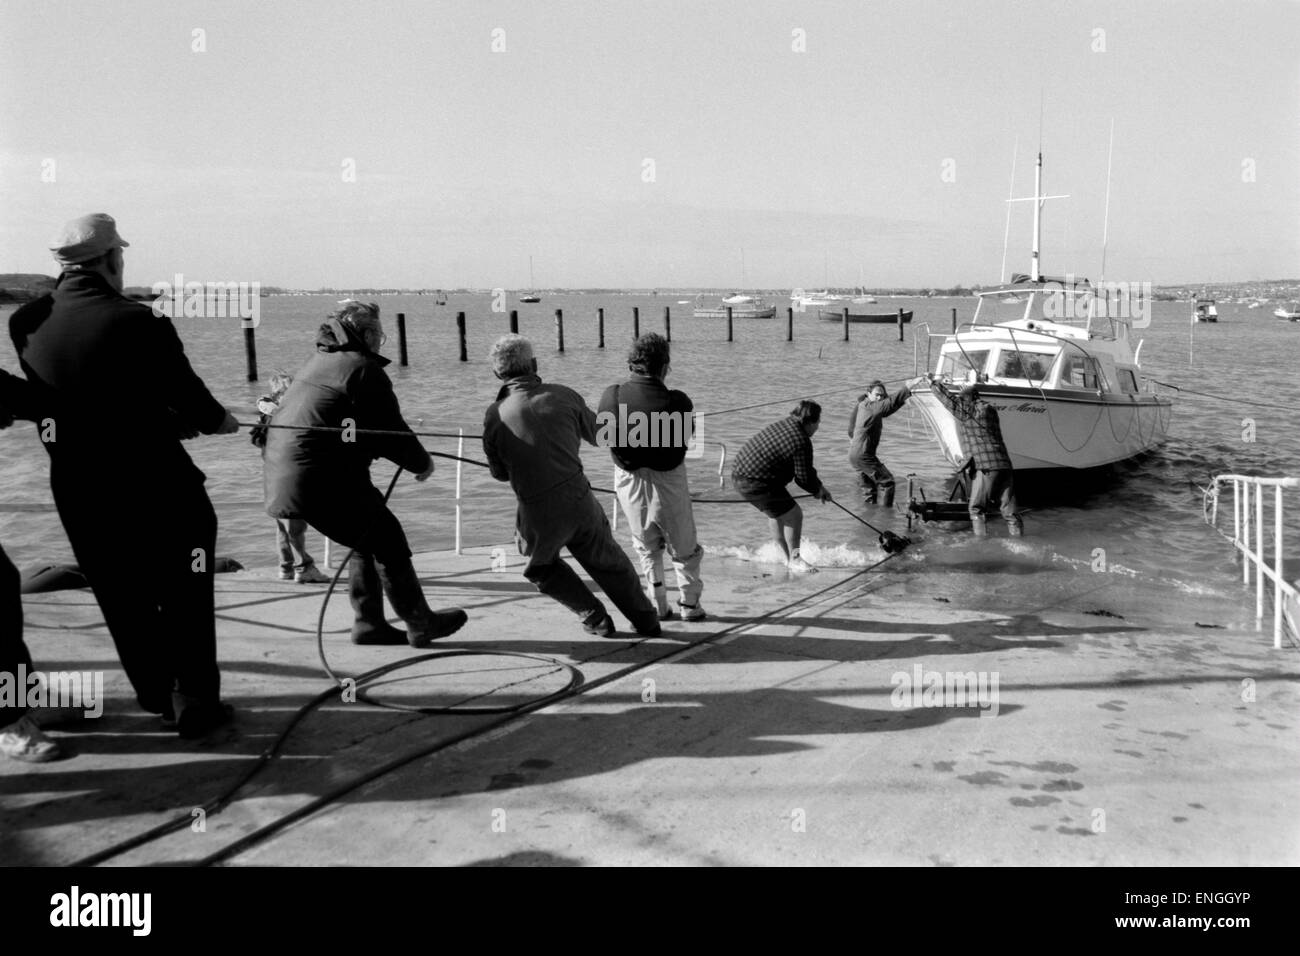 team of people pull together to haul a pleasure boat out of the sea and onto dry land Stock Photo